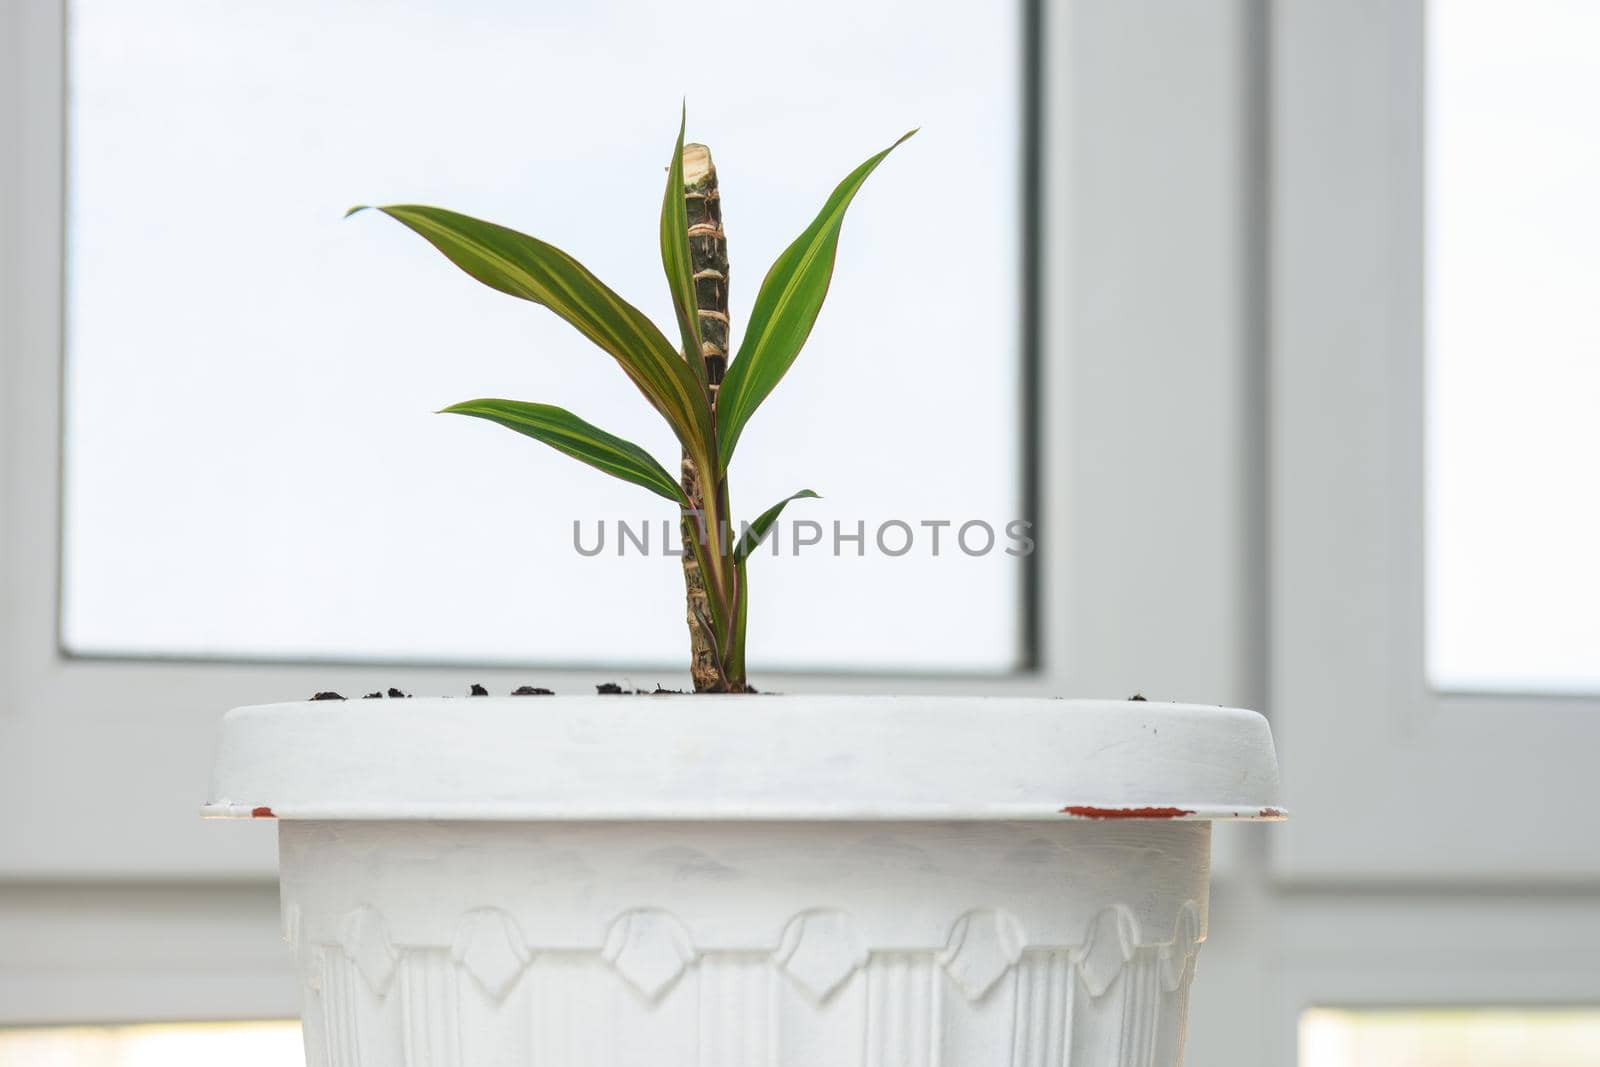 Seedling of a plant Cordilina close-up in a pot on a background of a window